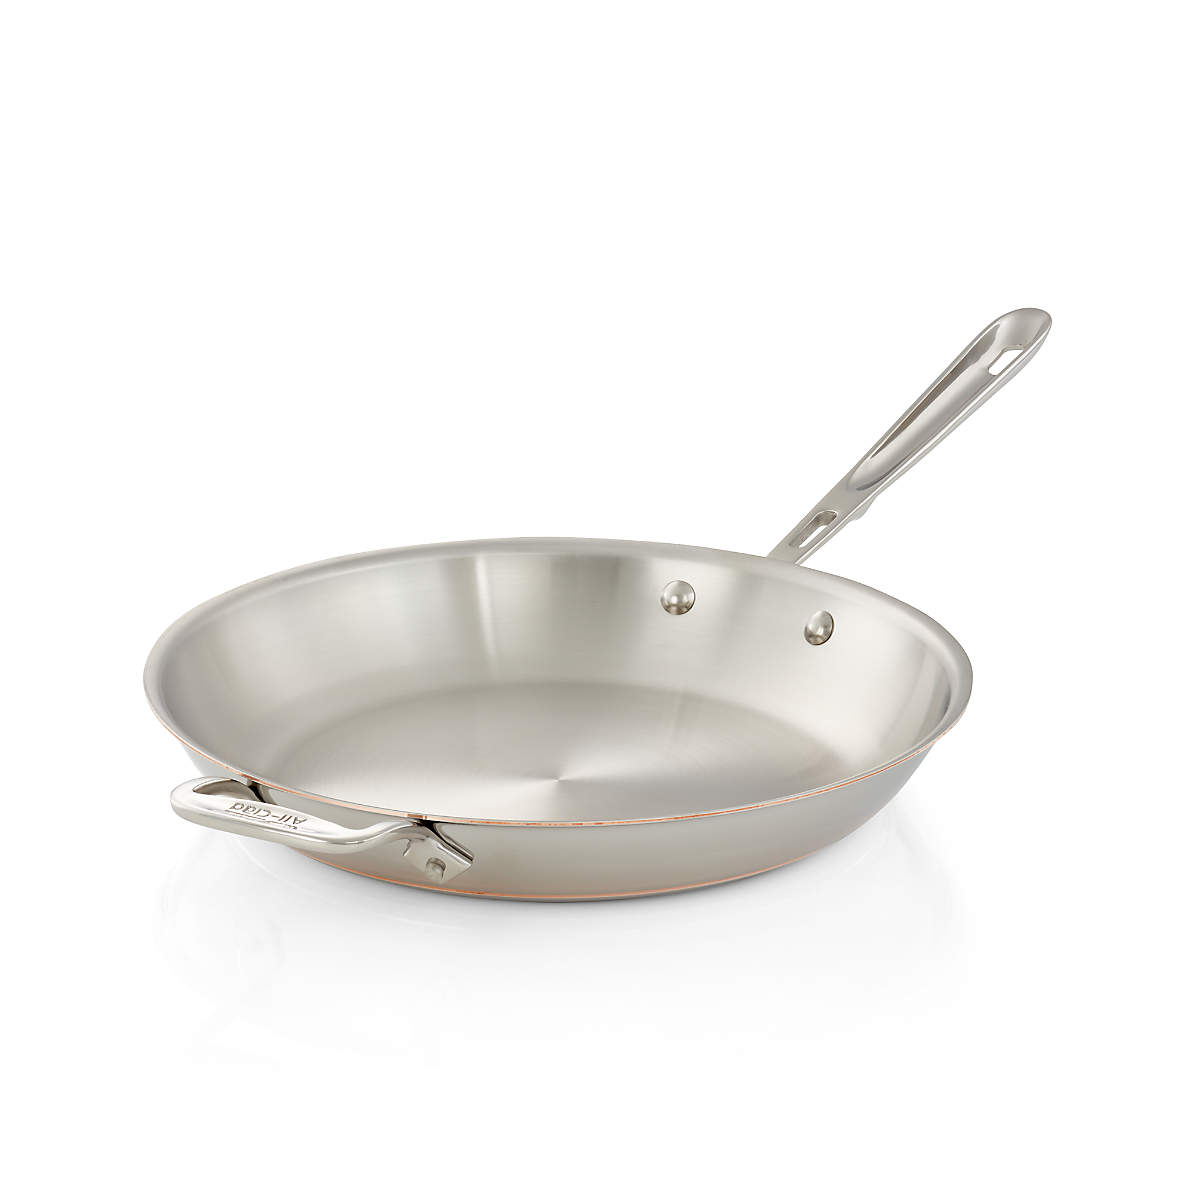 All-Clad 3912 Stainless Steel Lid for Tri-ply and Copper Core 12 inch FRY  PAN LID